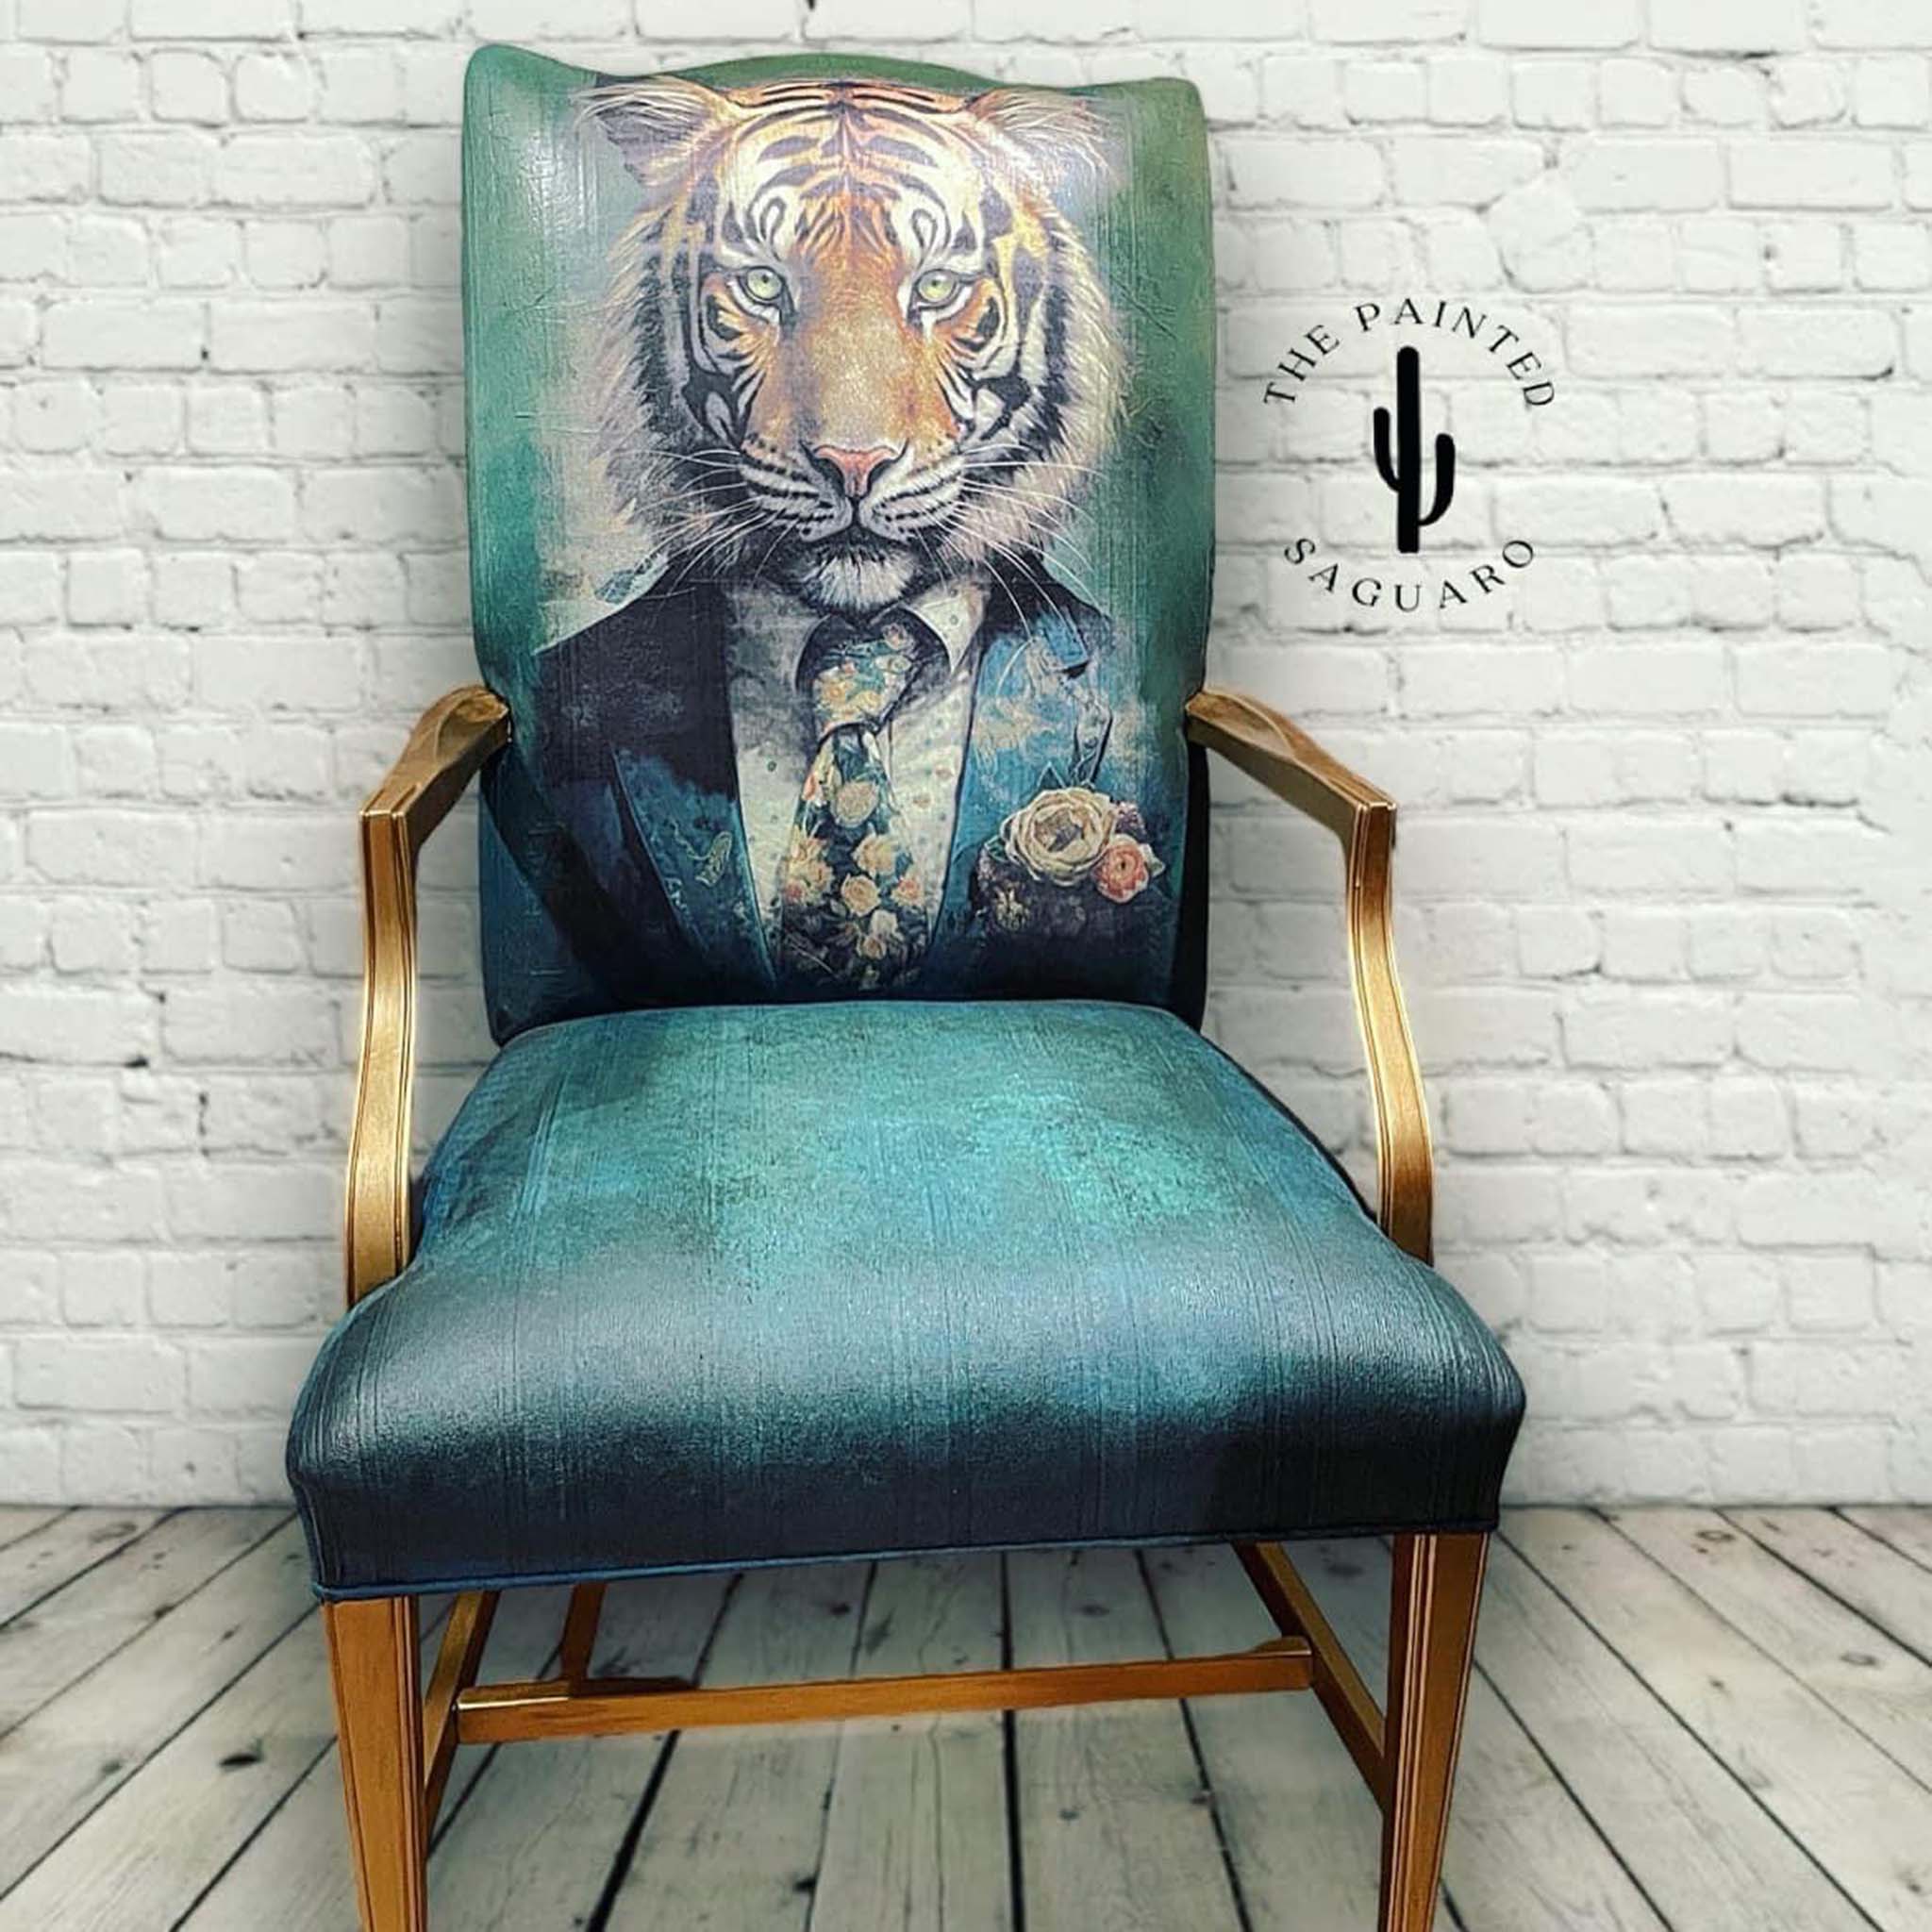 A vintage arm chair refurbished by The Painted Saguaro features Whimsykel's Sebastian Tiger tissue paper on the front of the back seat.